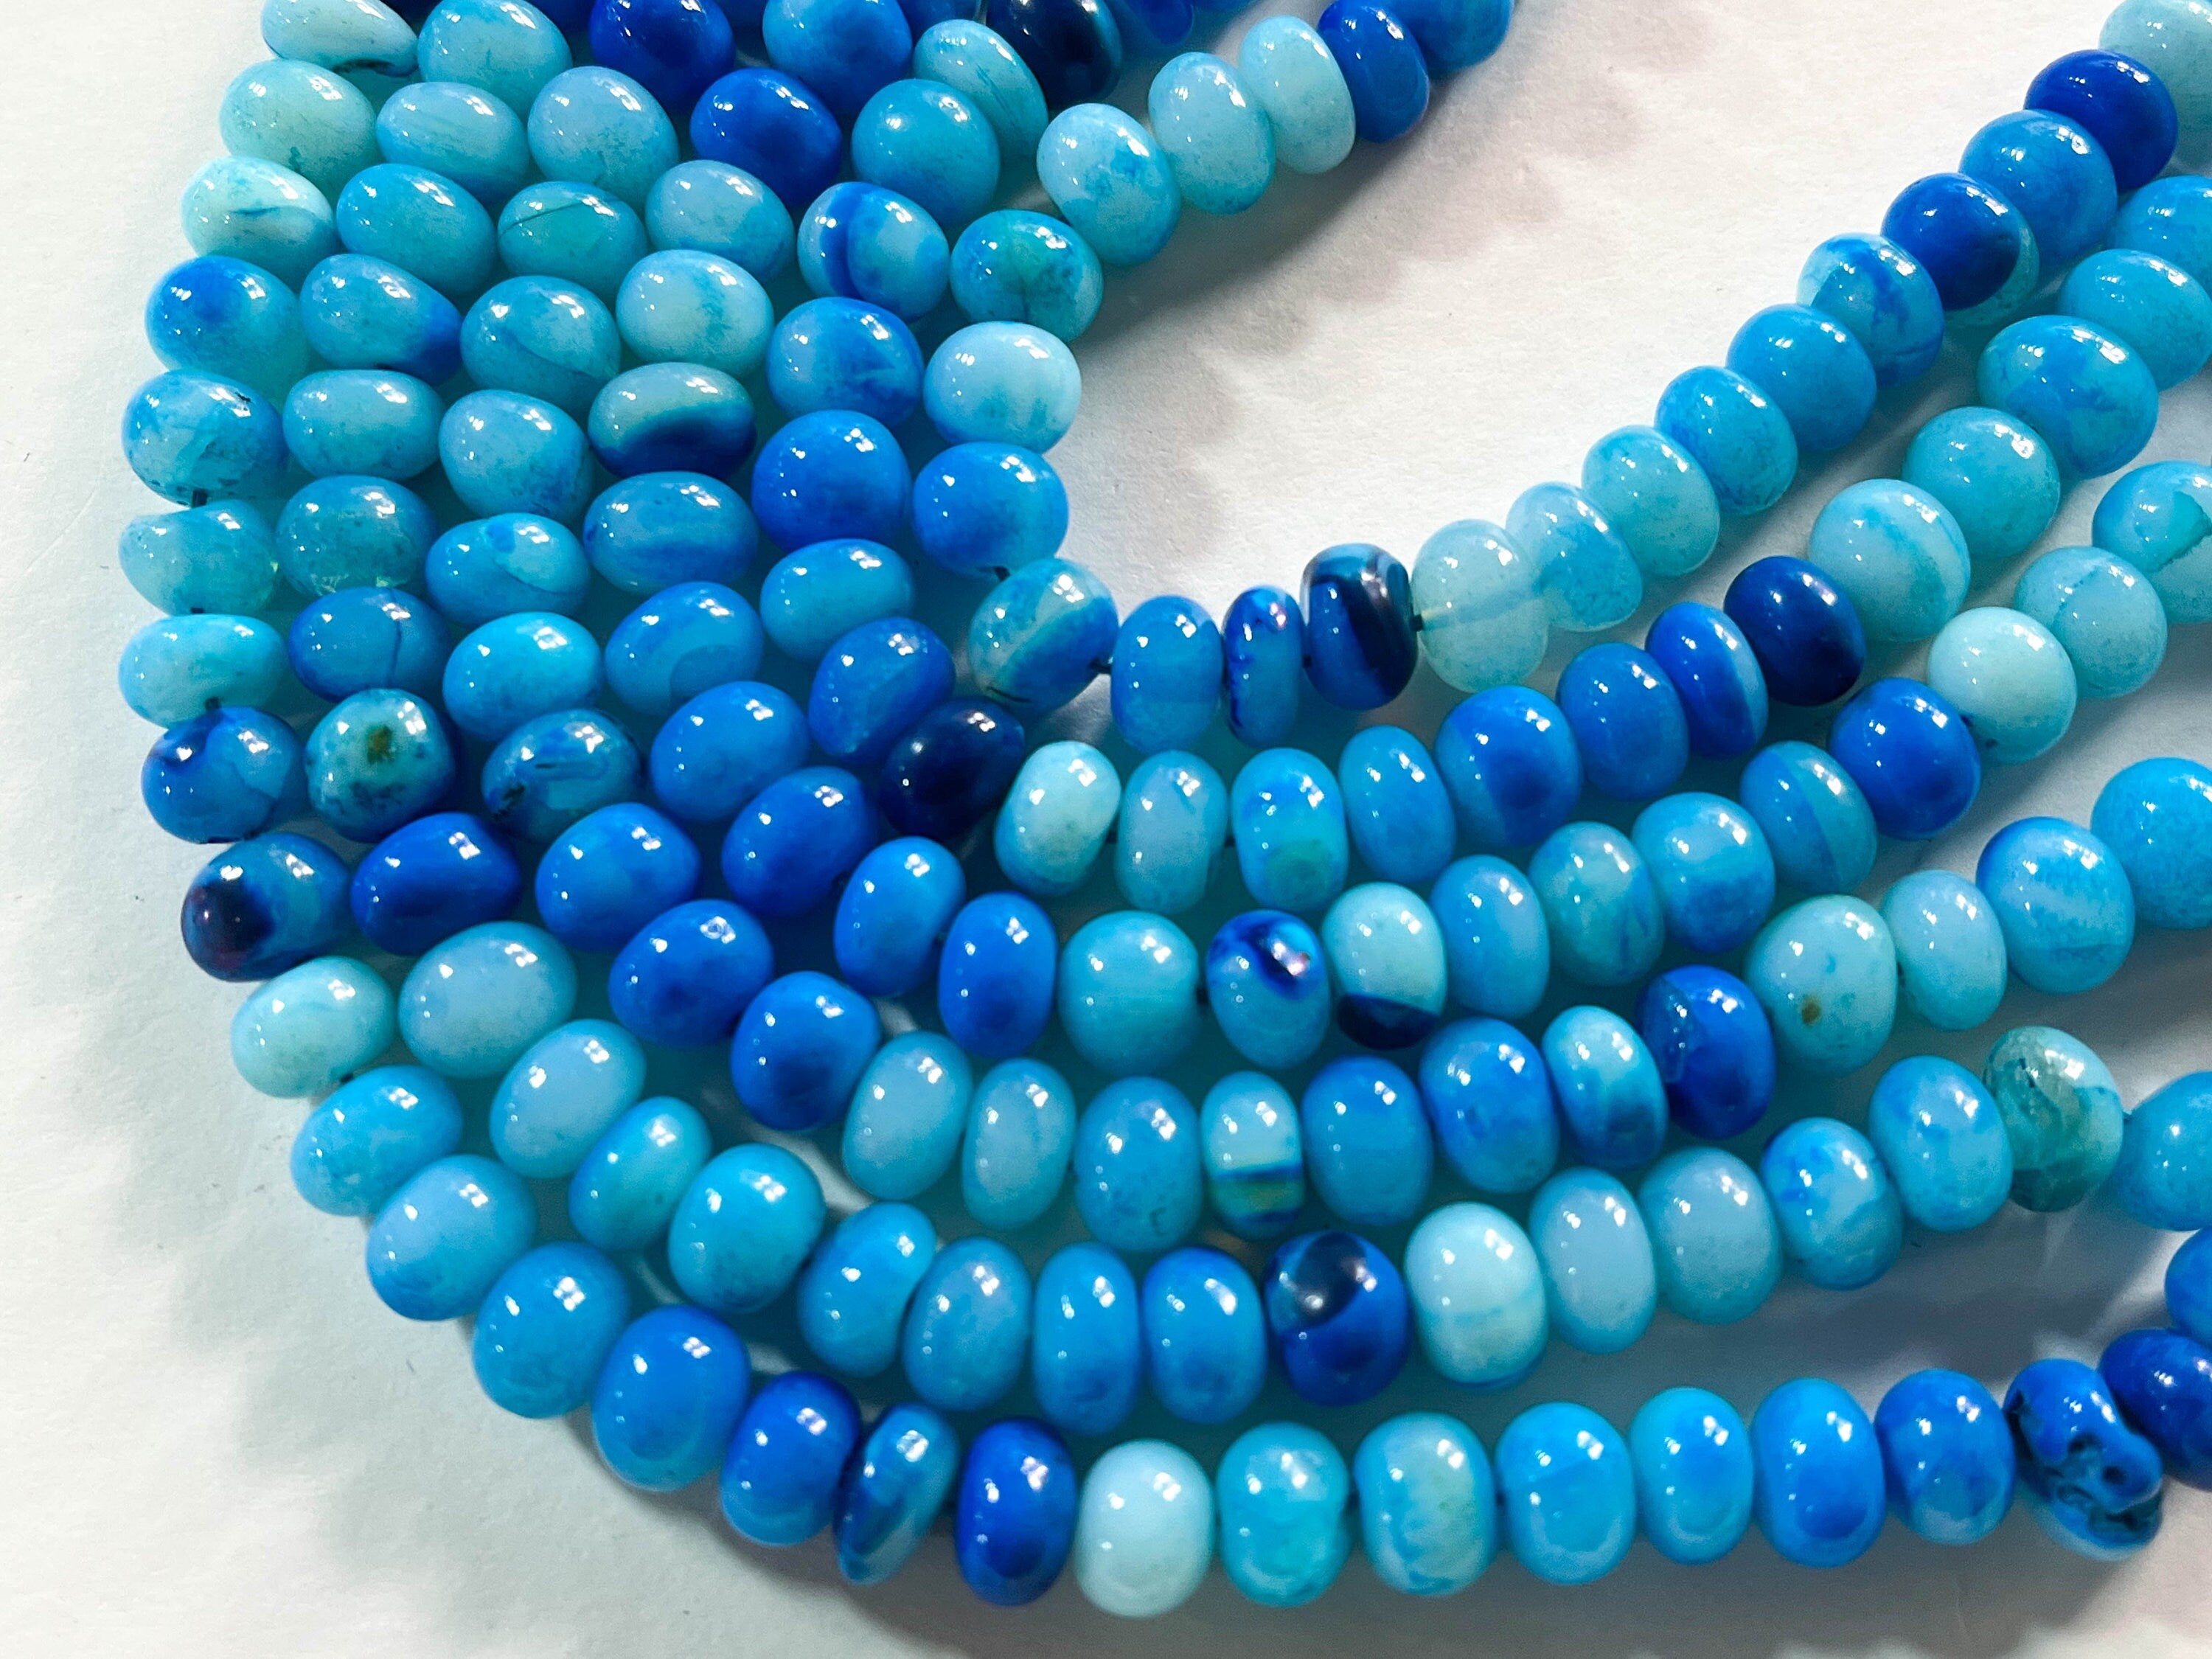 Beautiful Neon Blue Opal Smooth Rondelle Shape Beads - Beadsforyourjewelry